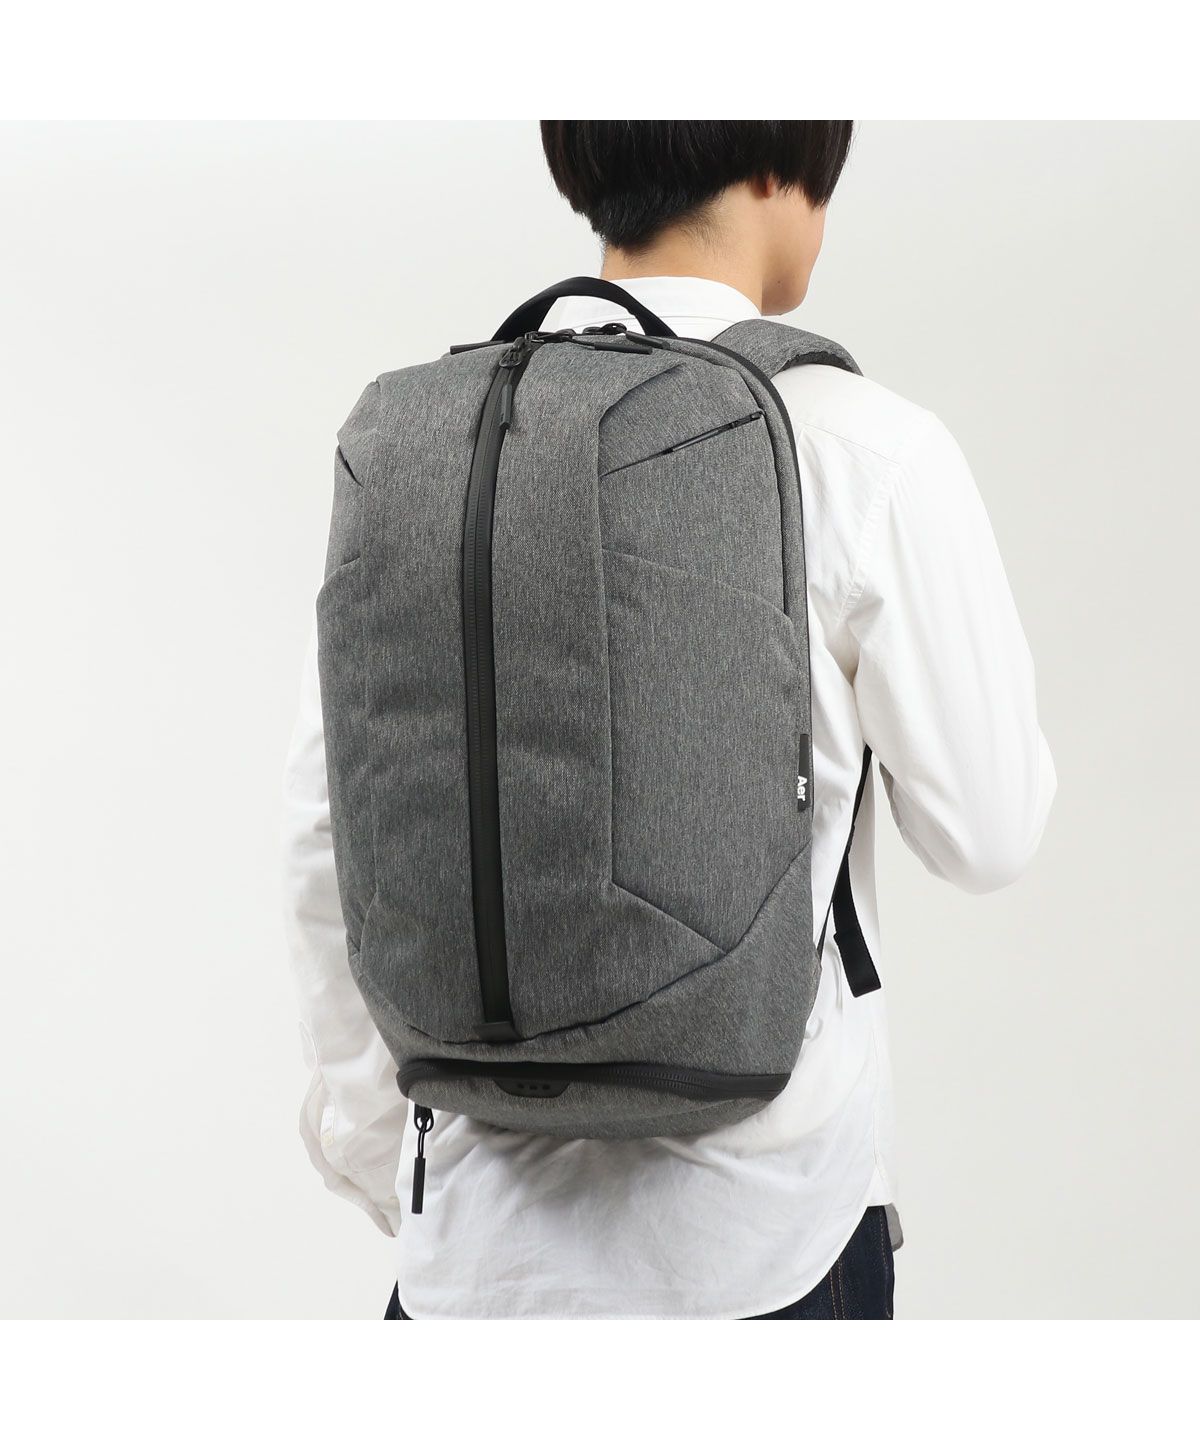 AER DUFFLE PACK 3 バッグ